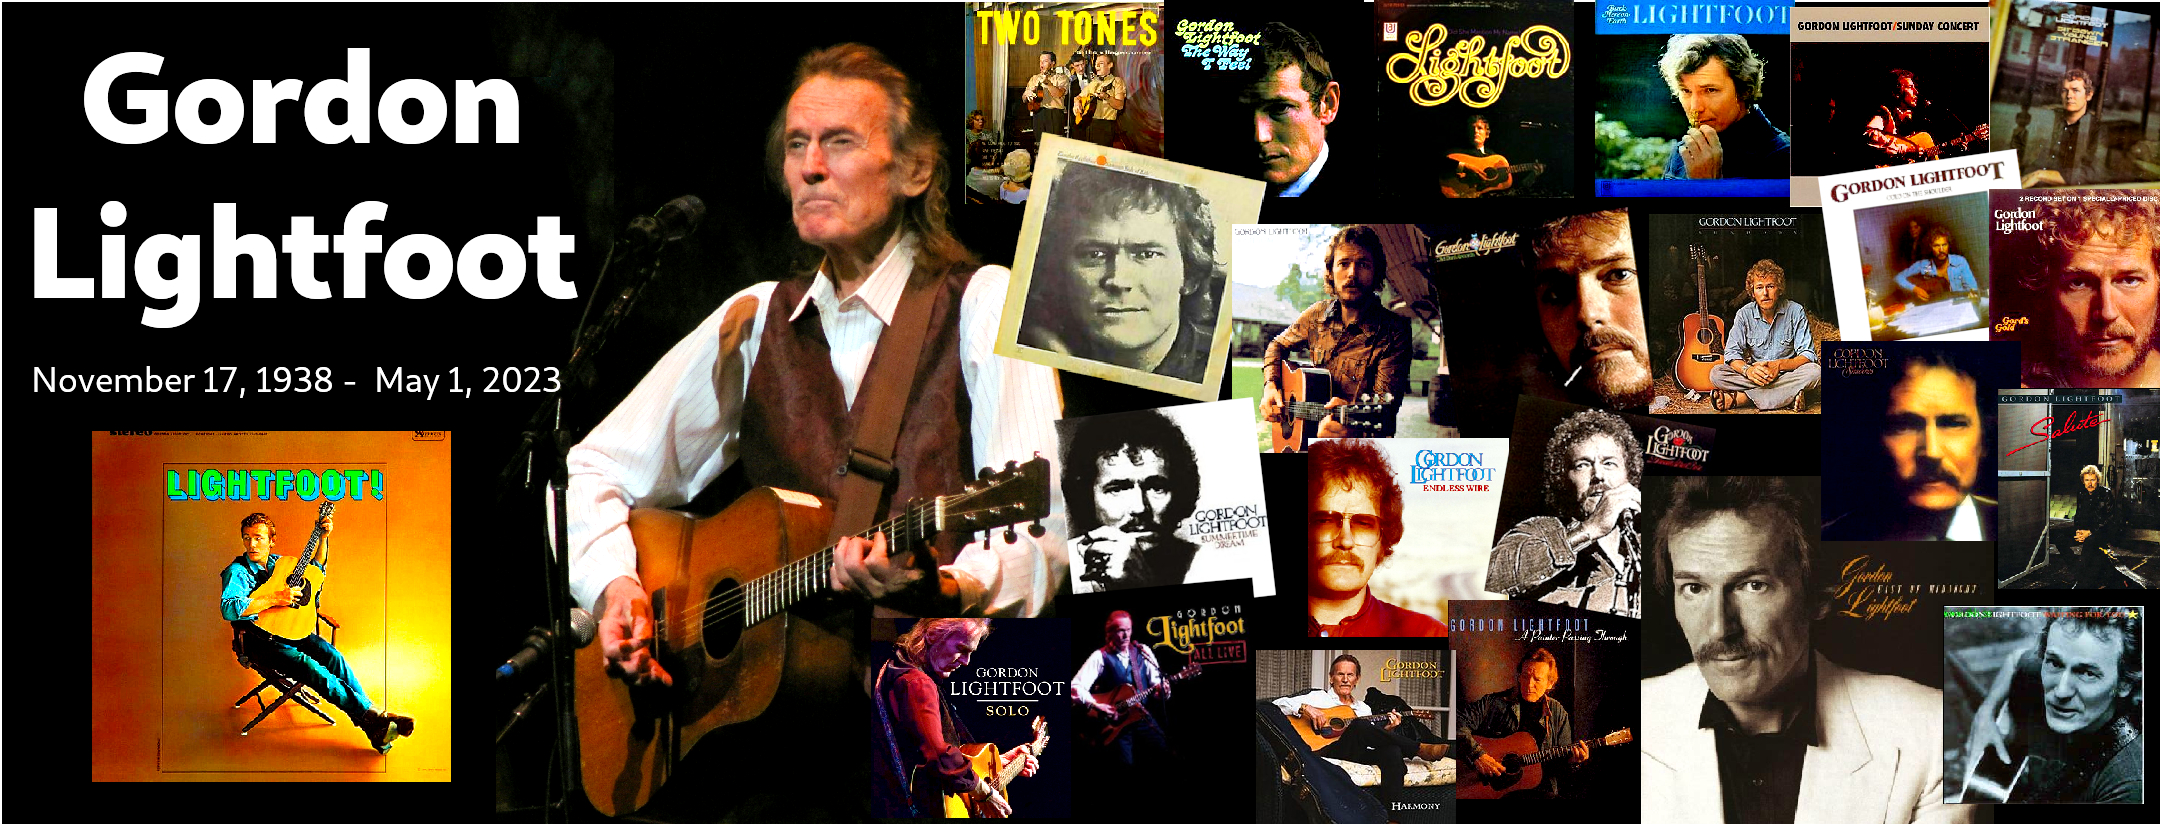 Remembering Gordon Lightfoot Collage [Text] Gordon Lightfoot November 17, 1938 - May 1, 2023 [Photo] Gordon Lightfoot at Interlochen [Pictured] Album Covers • Lightfoot! (1966) • Two Tones at the Village Corner (1962) • The Way I Feel (1967) • Did She Mention My Name? (1968) • Back Here on Earth (1968) • Sunday Concert (1969) • Sit Down Young Stranger (1970) • Summer Side of Life (1971) • Don Quixote (1972) • Old Dan's Records (1972) • Sundown (1974) • Cold On The Shoulder (1975) • Gord's Gold (compilation 1975) • Summertime Dream (1976) • Endless Wire (1978) • Dream Street Rose (1980) • Shadows (1982) • Salute (1983) • Solo (2020) • All Live (2012) • Harmony (2004) • A Painter Passing Through (1998) • East of Midnight 1986) • Waiting For You (1993)